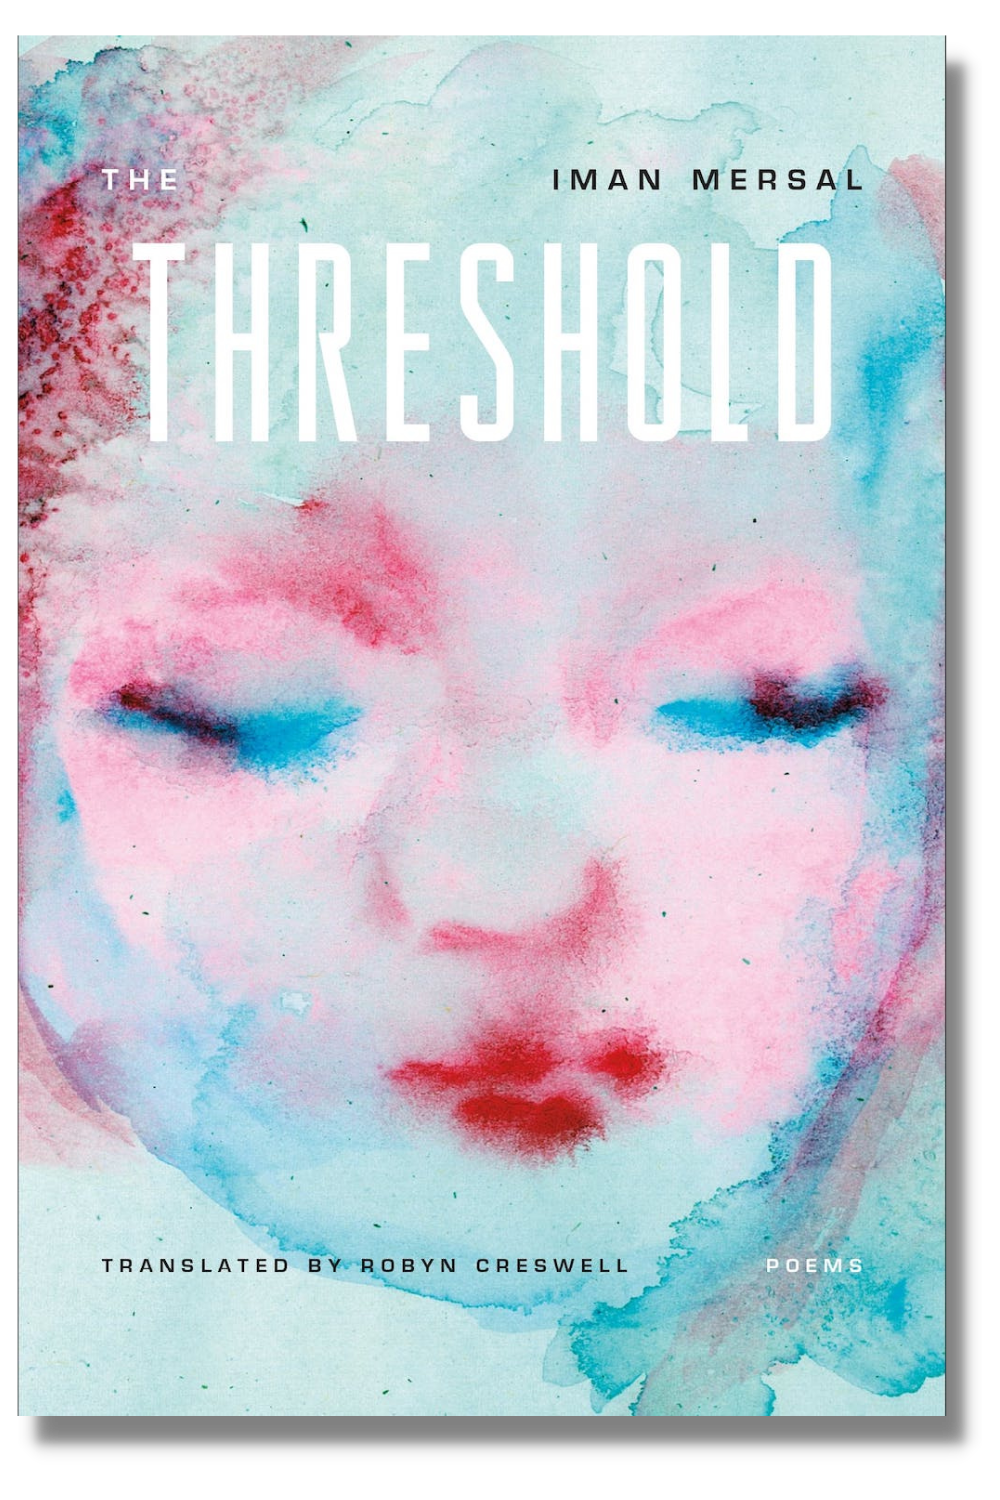 The cover of "The Threshold"